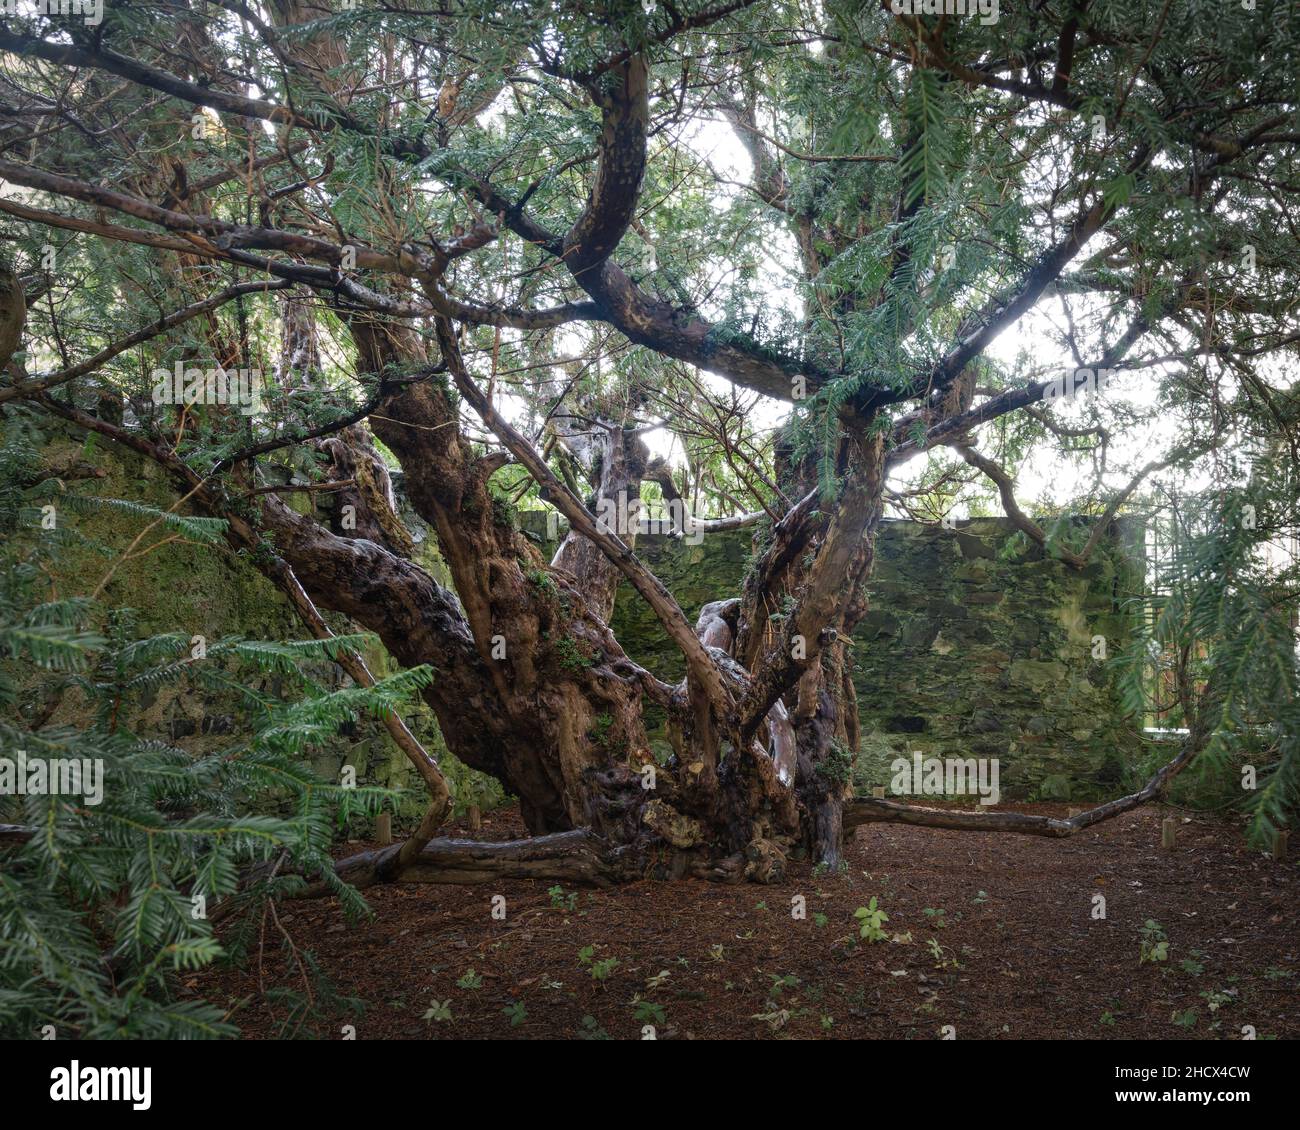 The Fortingall Yew, possibly the oldest tree in the UK, at an estimated 2000 to 3000 years of age. This European Yew (Taxus baccata) specimen is locat Stock Photo